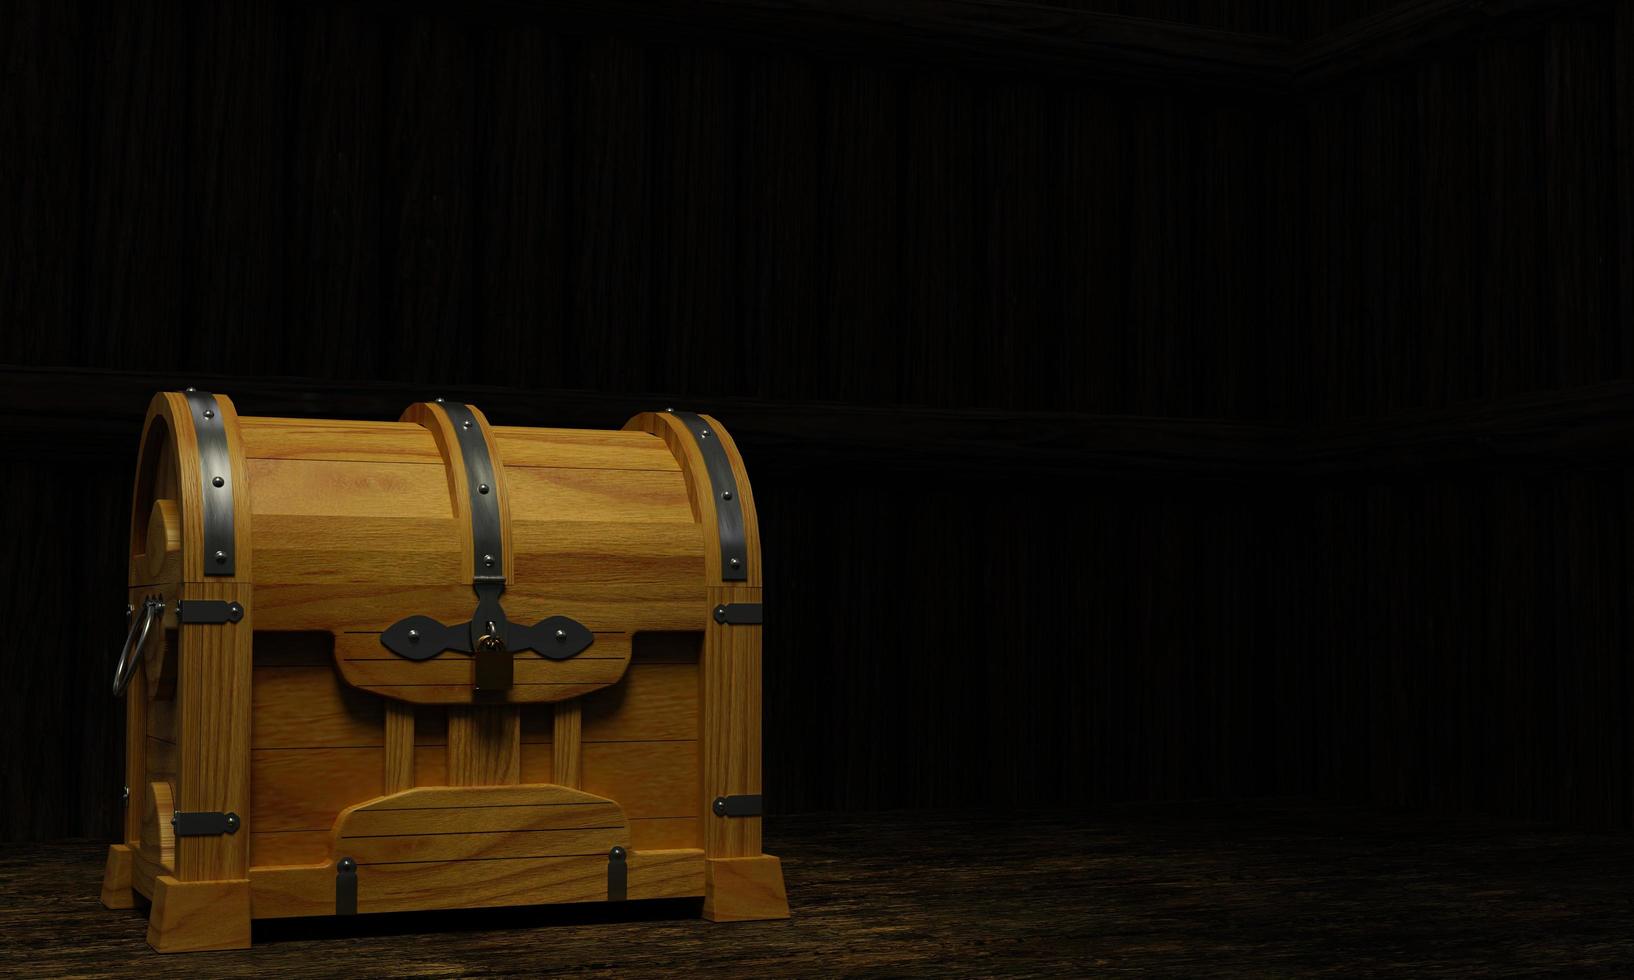 New antique treasure chest, made of teak, reinforced with metal plates and pins, locked with a golden padlock. Wooden floor and background.3D Rendering photo